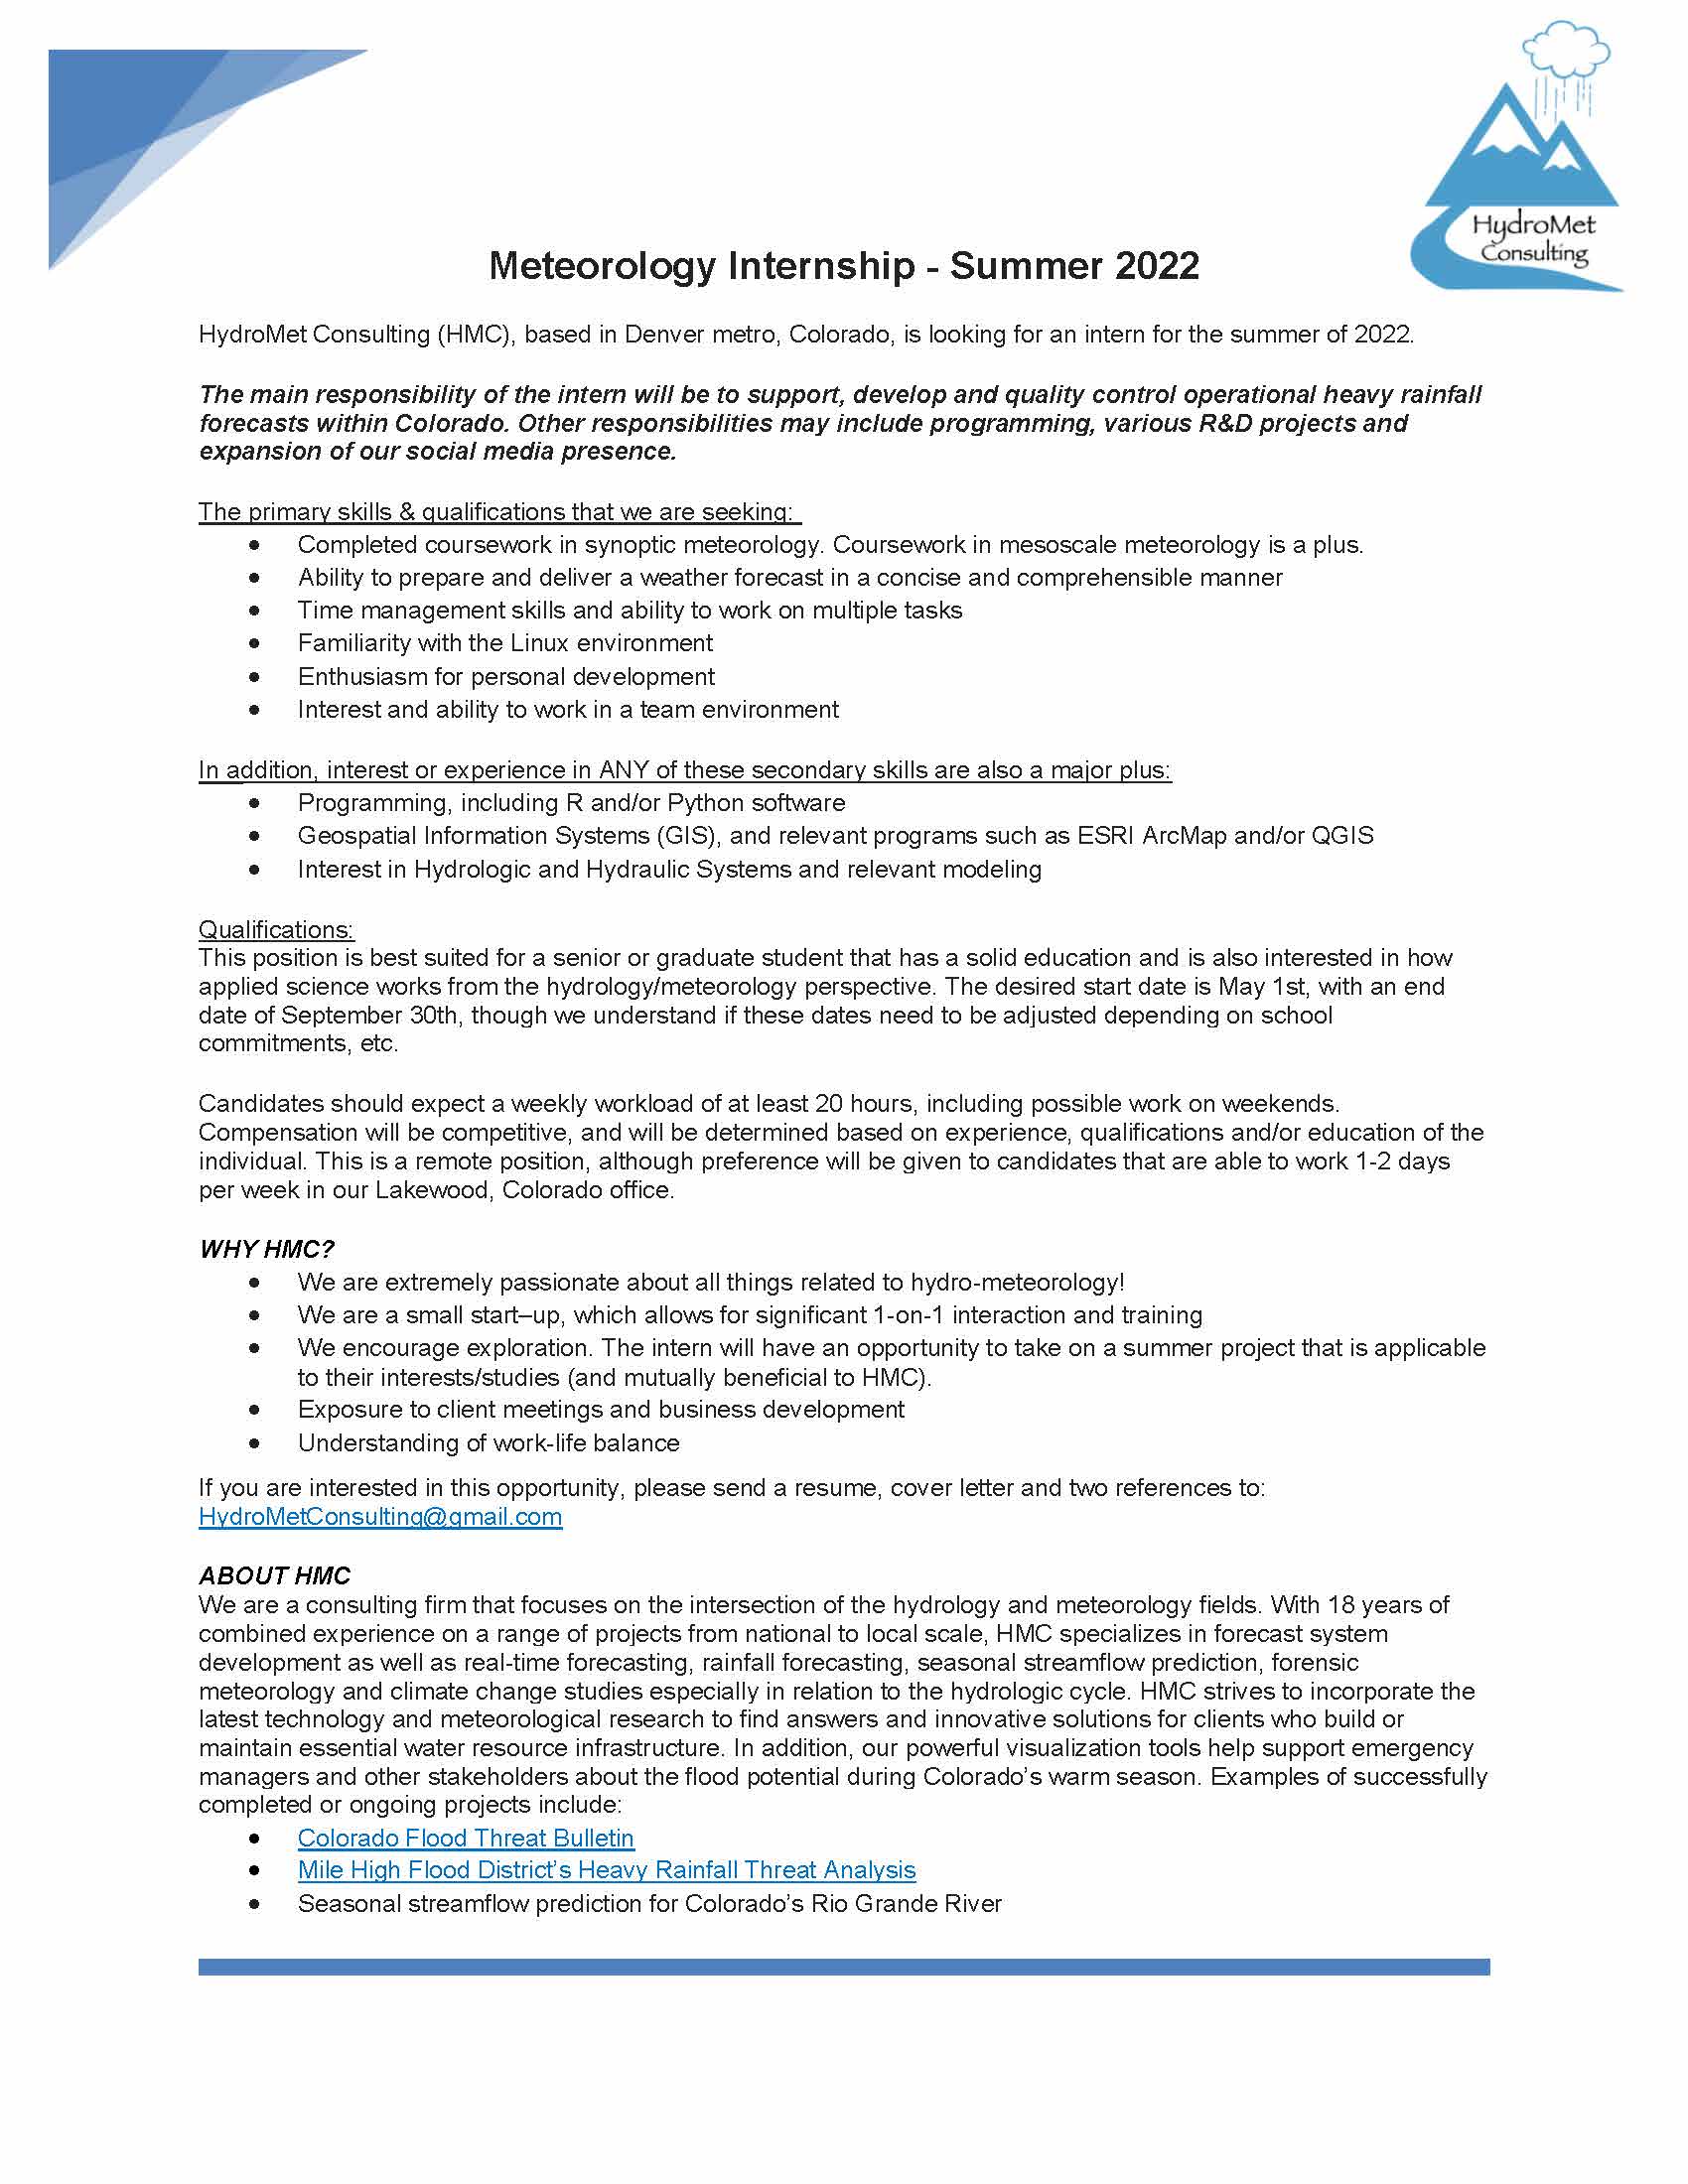 Meteorology Internship with HydroMet Consulting Announce University